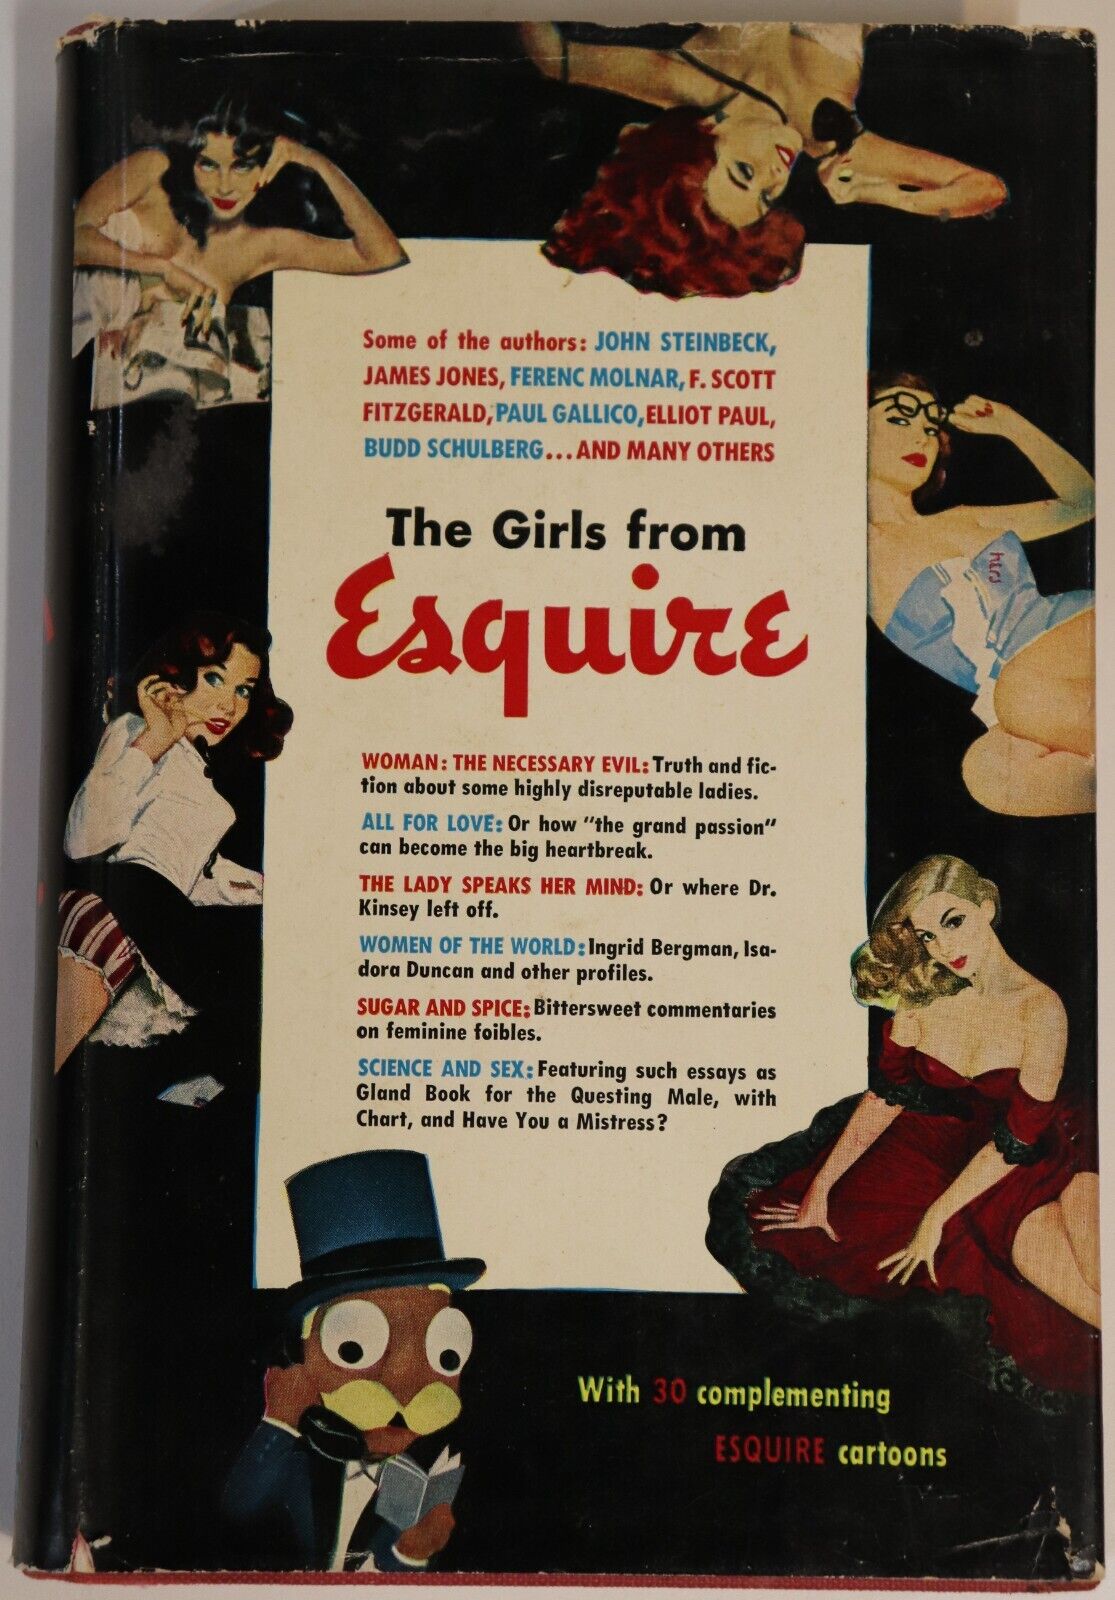 The Girls From Esquire - 1953 - 1st Edition Vintage Social History Book